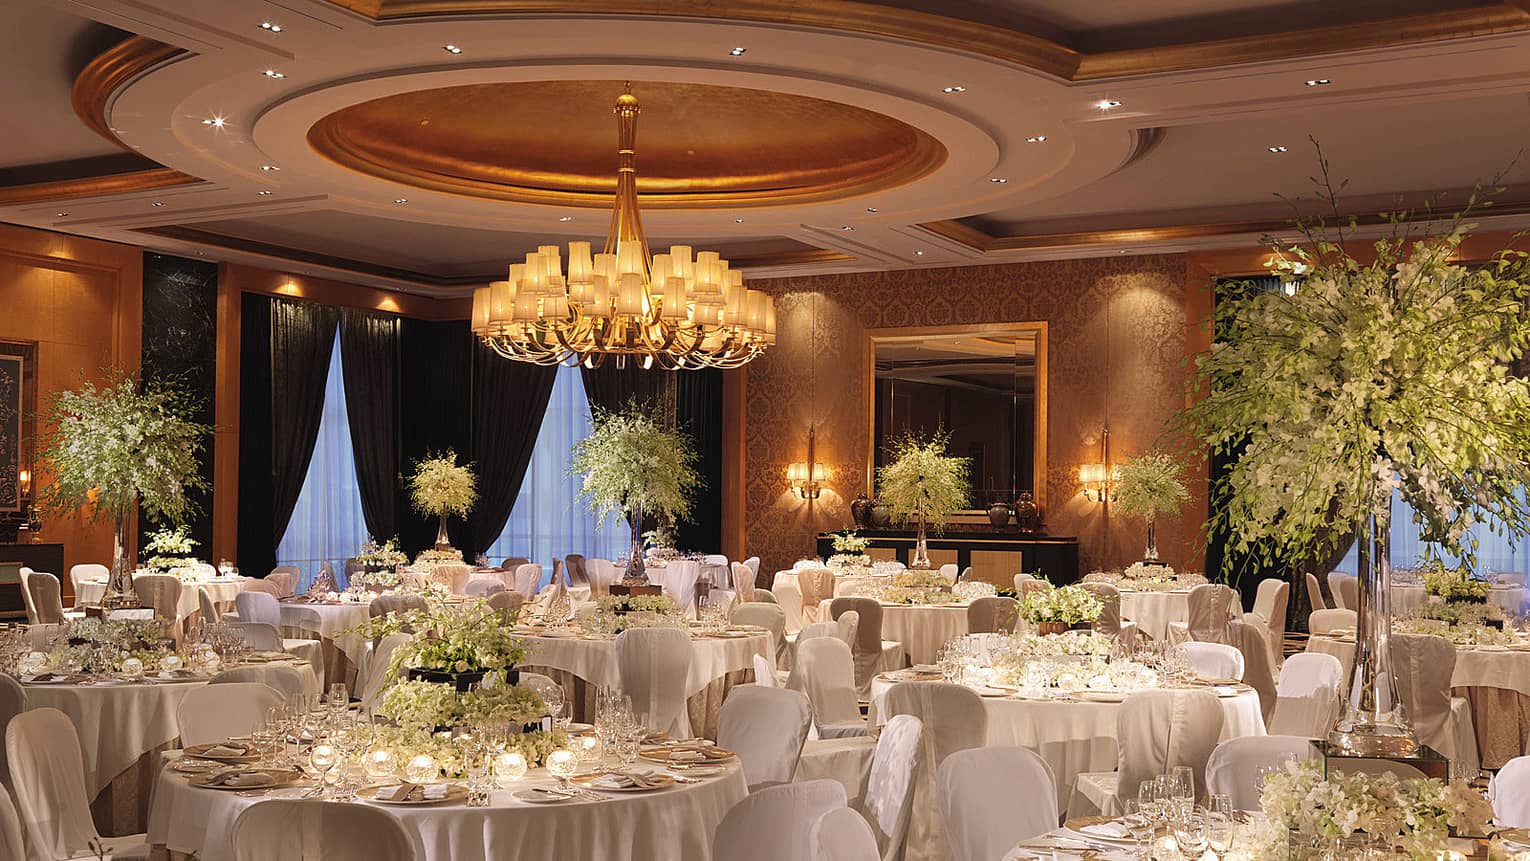 Banquet dining tables with candles, tall floral arrangements in ballroom